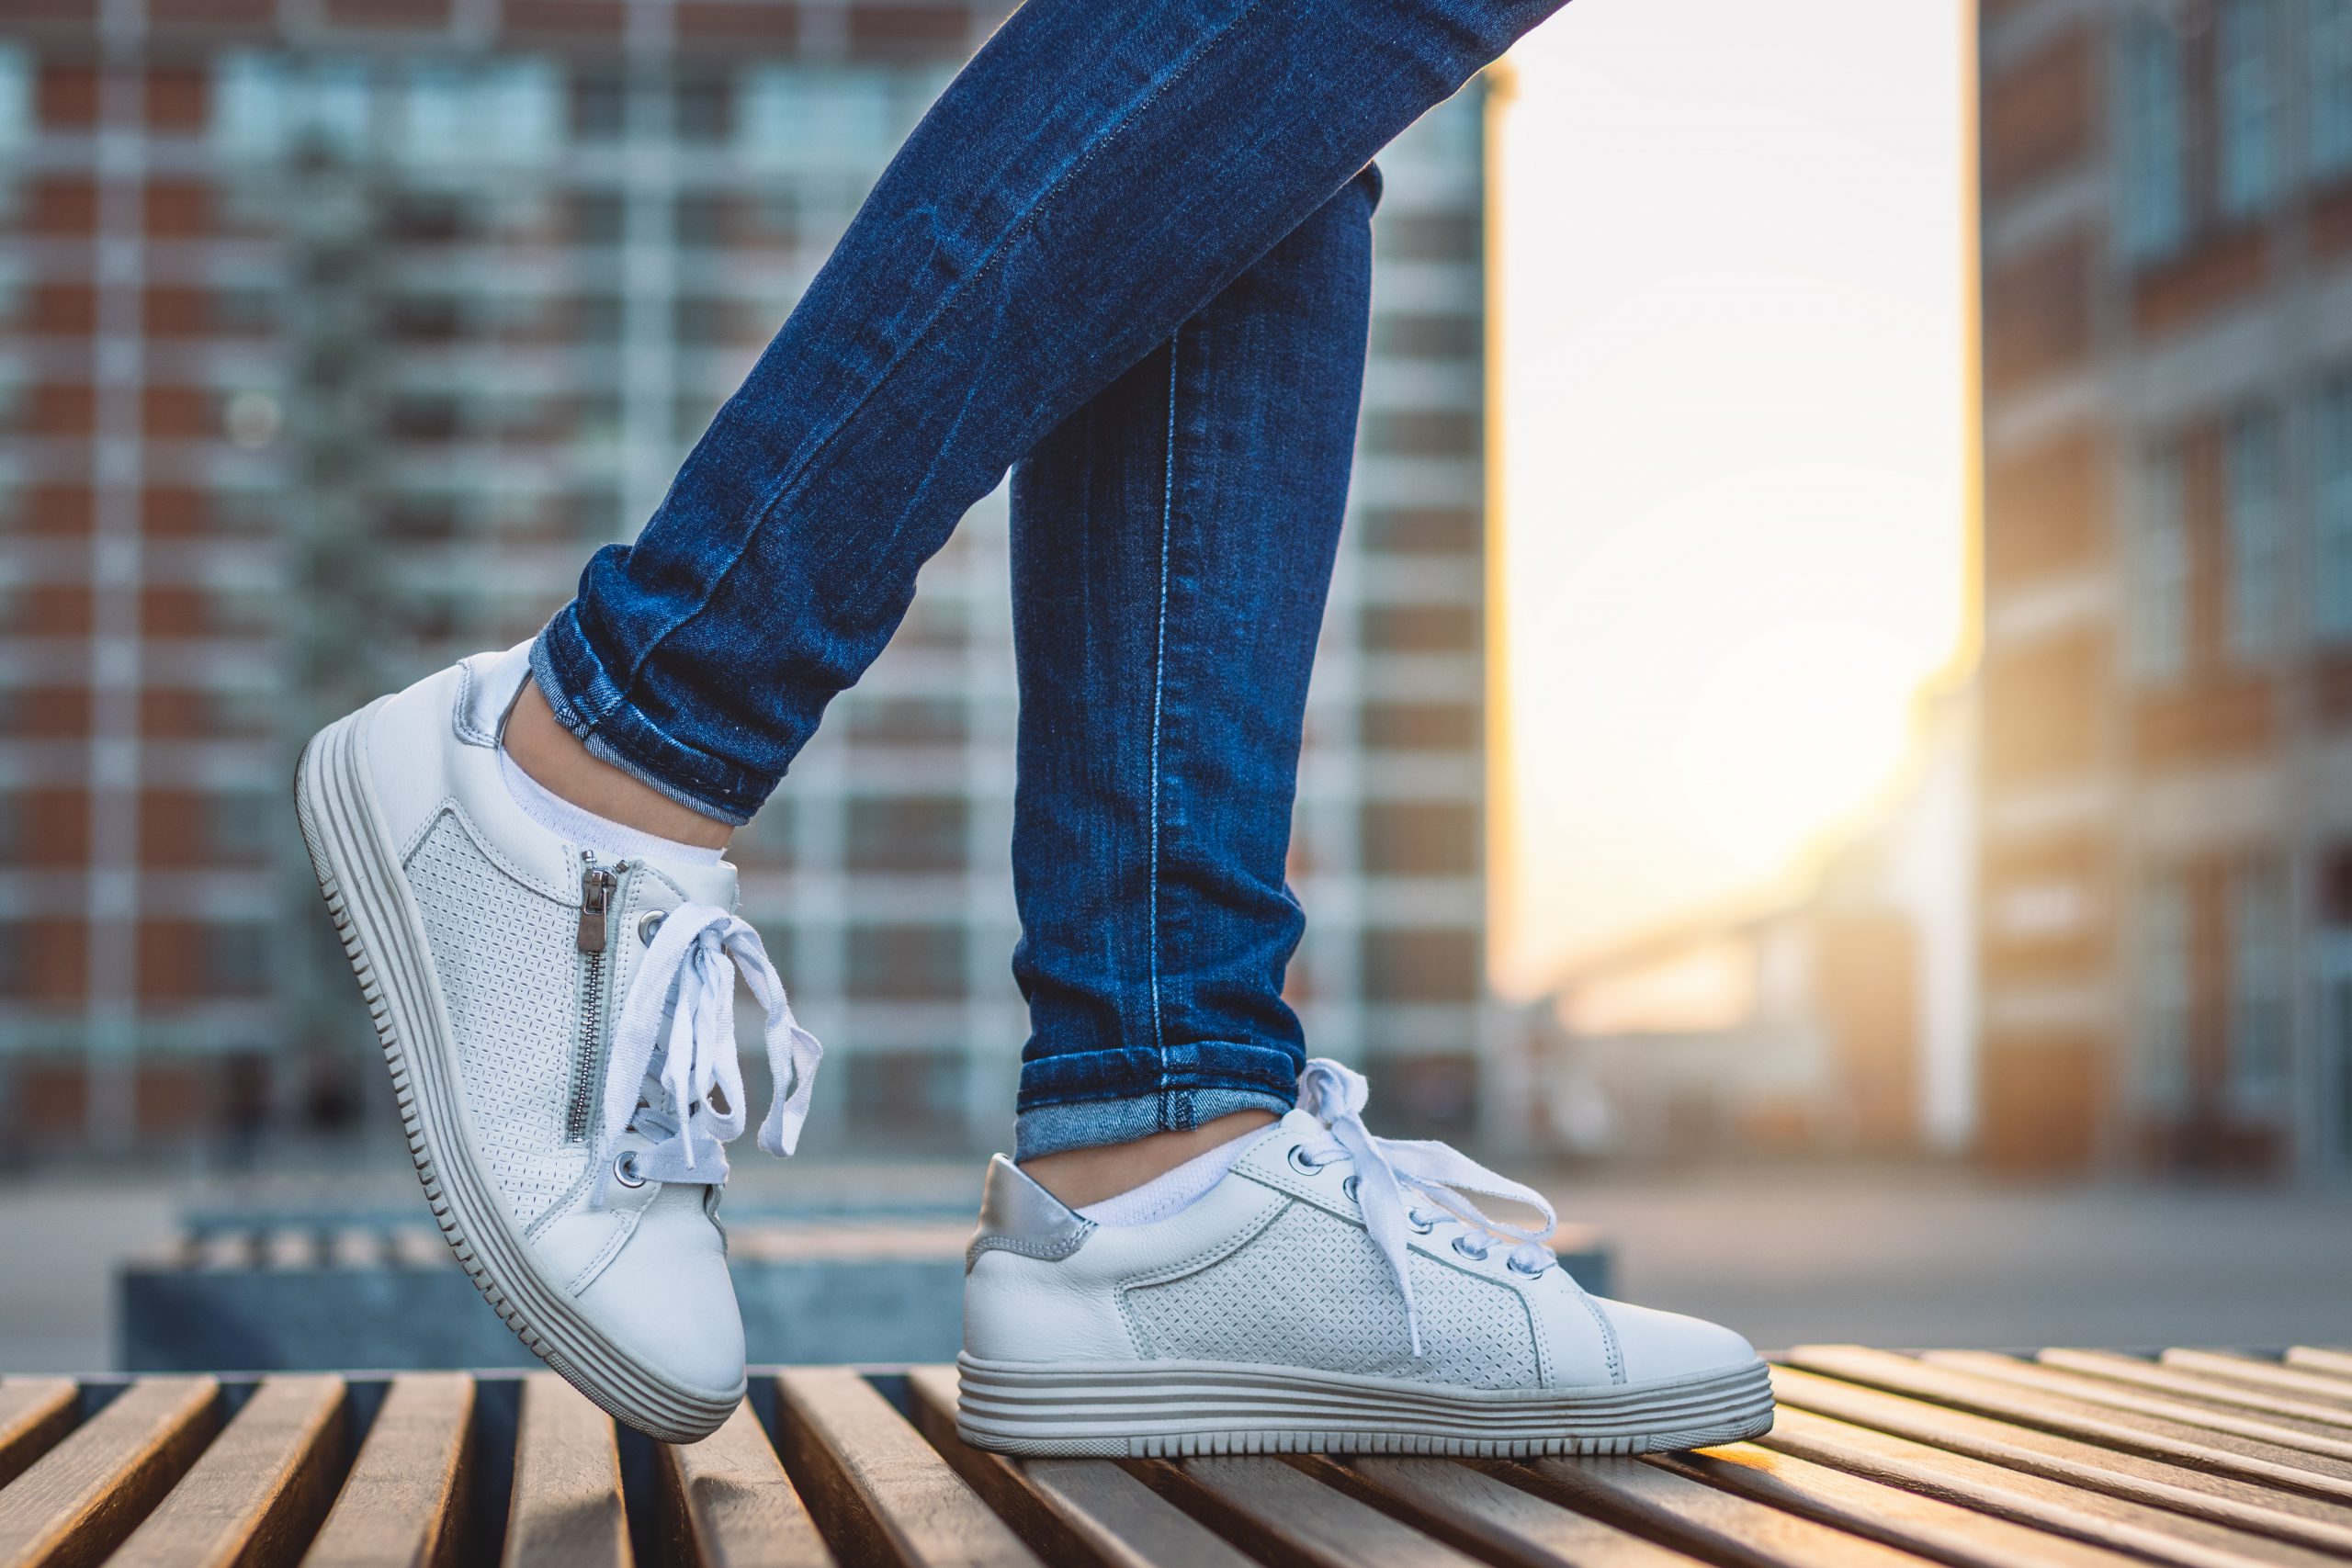 10 astuces pour nettoyer vos chaussures blanches  Nettoyer chaussure  blanche, Chaussures blanches, Nettoyer chaussures